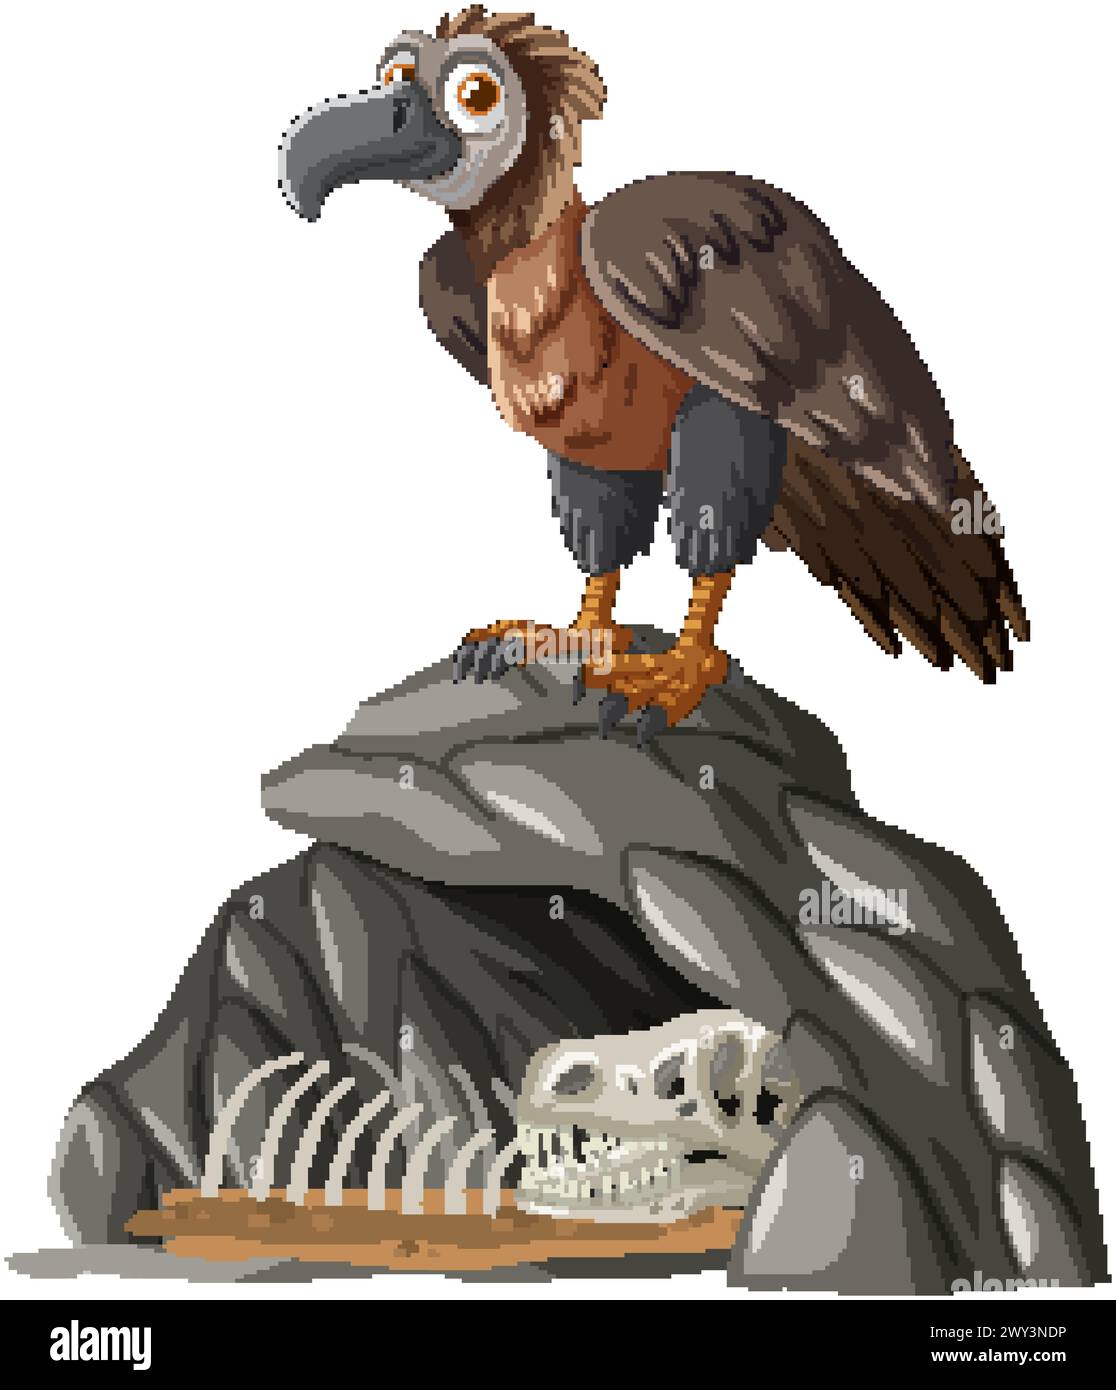 Illustration of a vulture atop rocks with bones Stock Vector